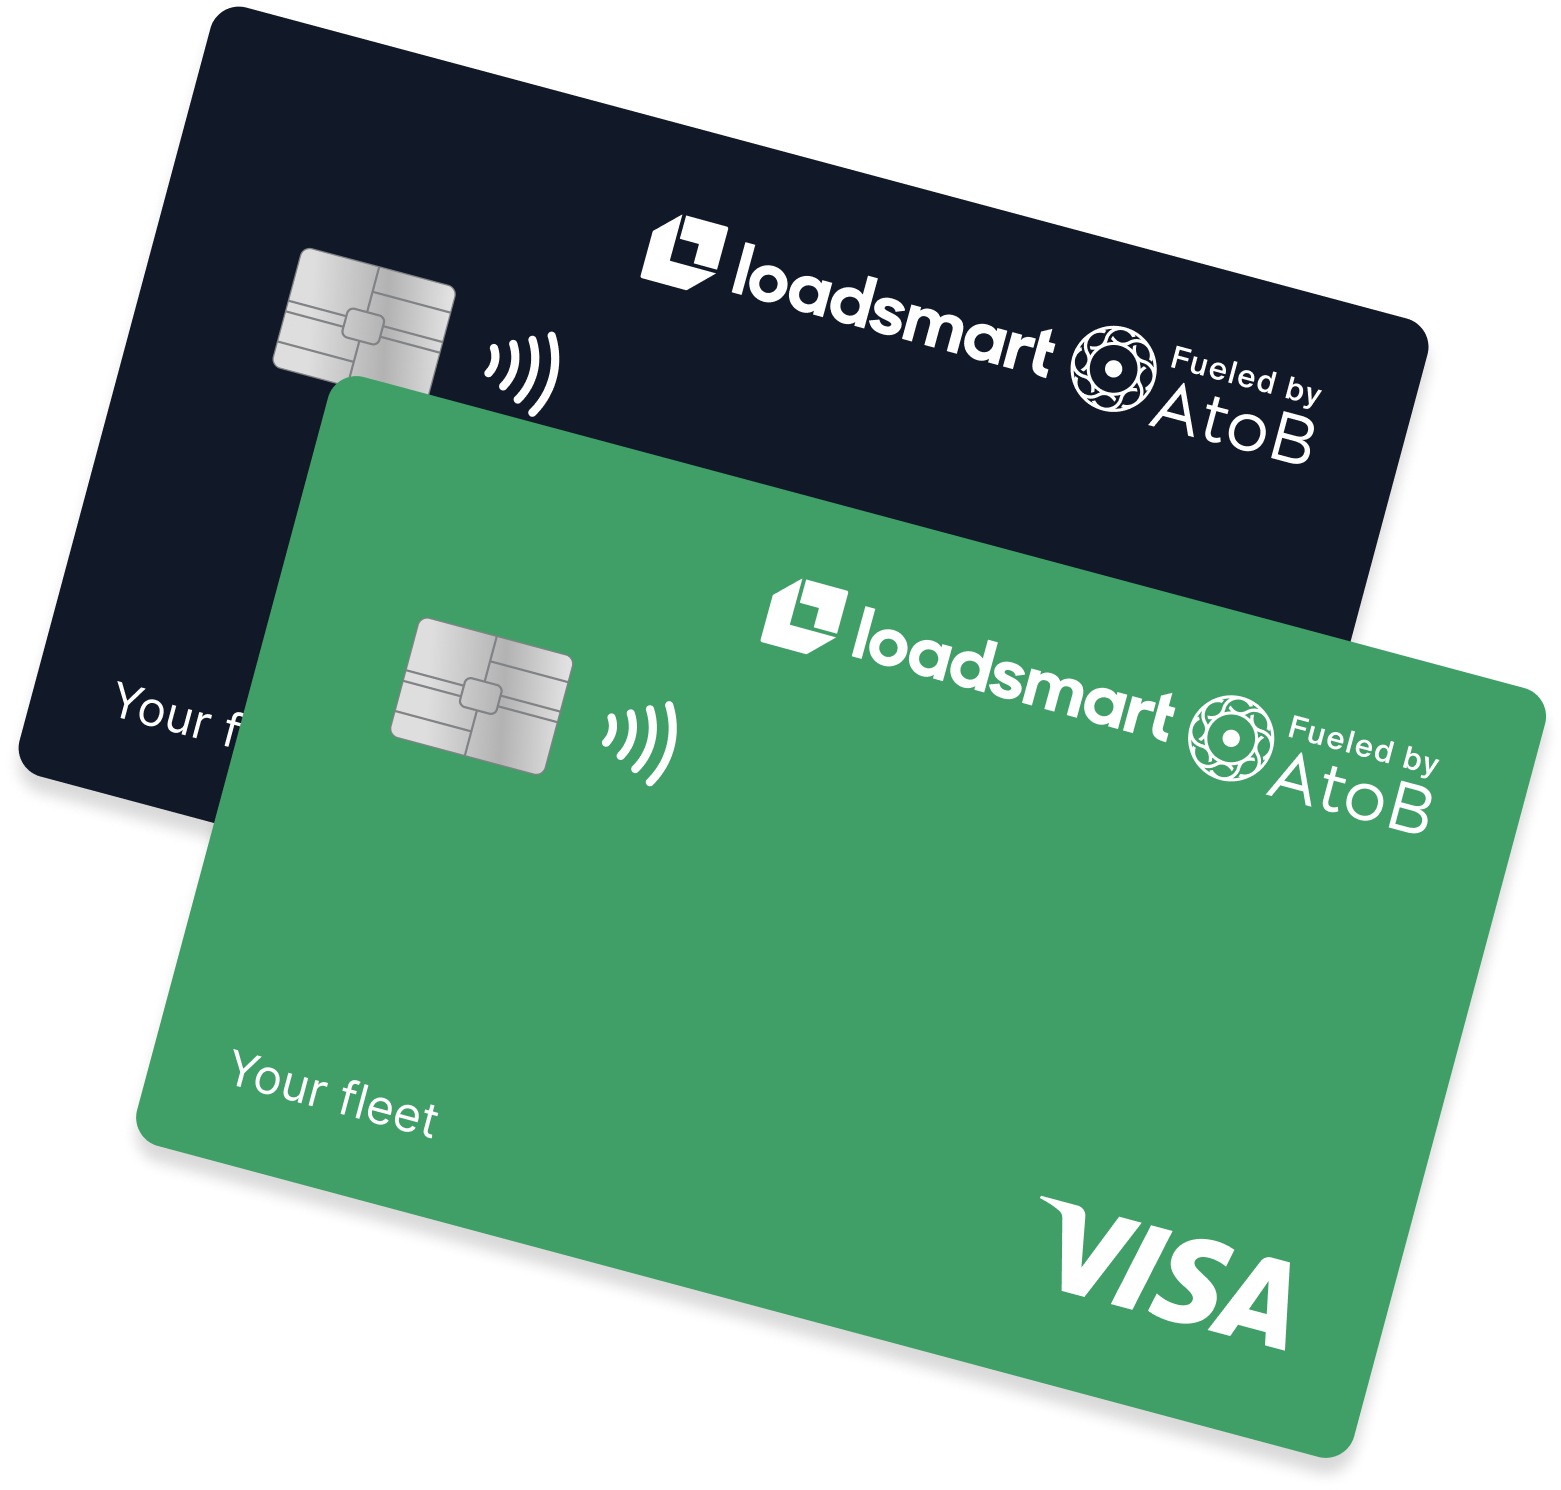 a-fuel-card-accepted-everywhere-loadsmart-fueled-by-atob